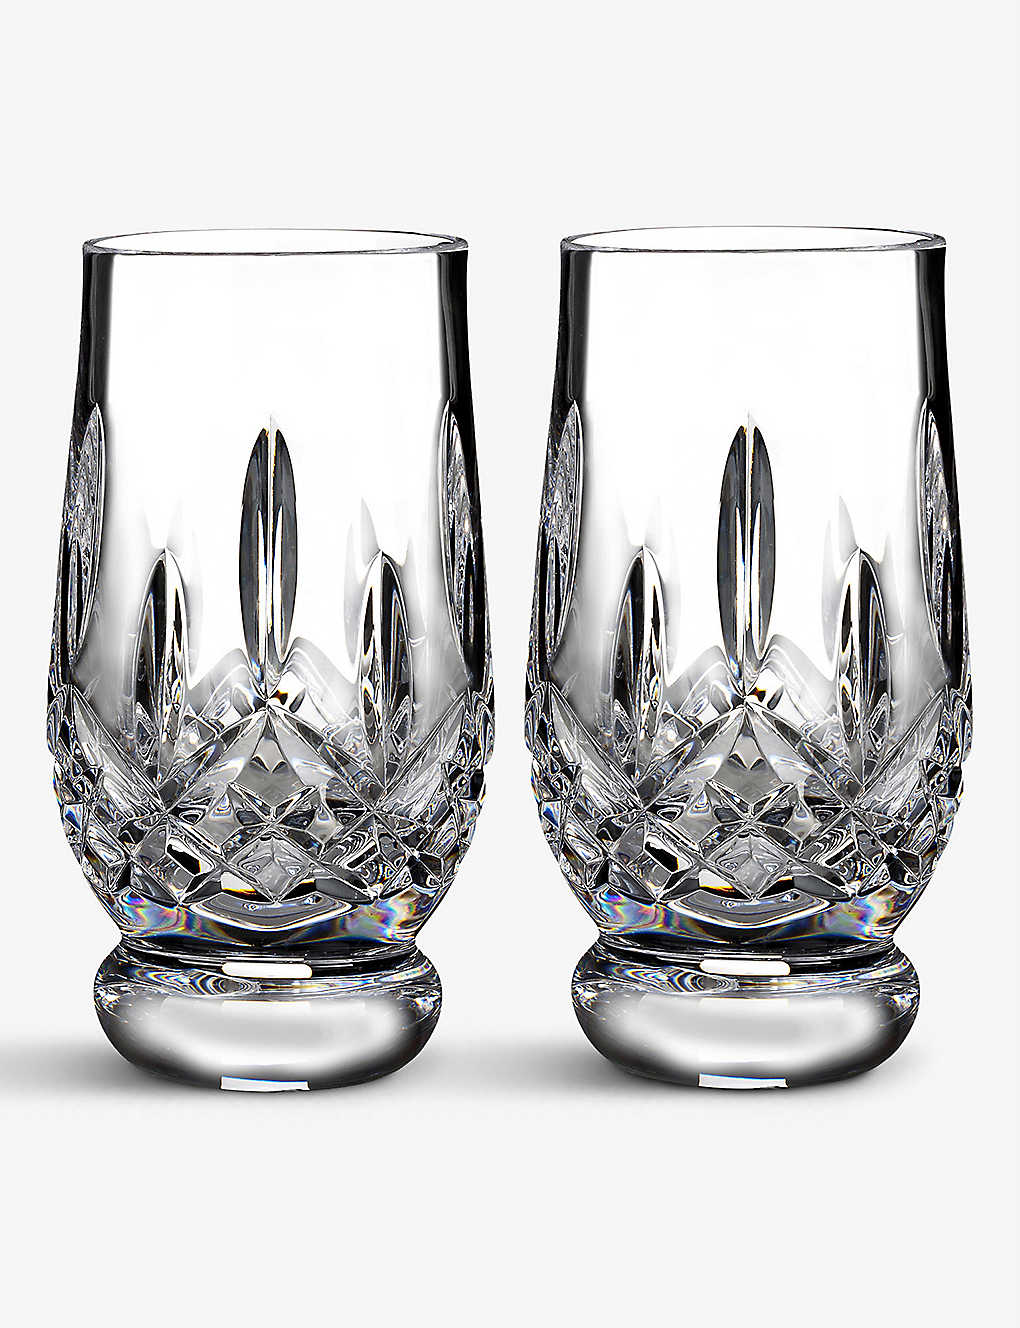 Shop Waterford Lismore Connoisseur Footed Tasting Tumblers Set Of 2